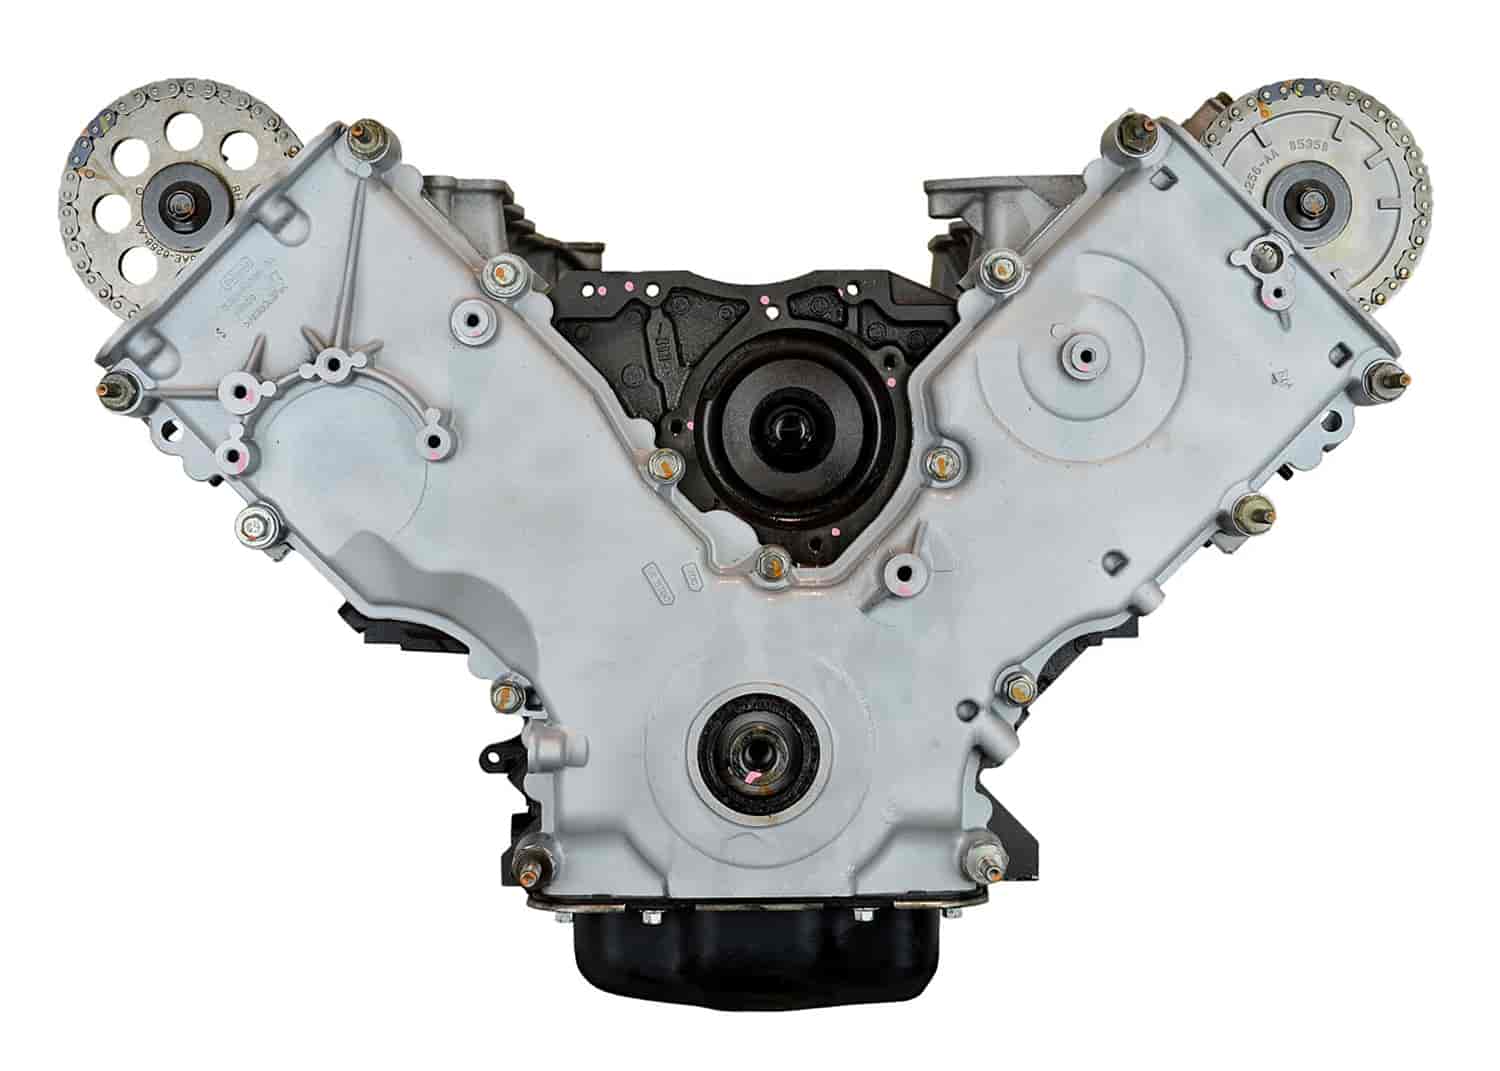 Remanufactured Crate Engine for 2008-2016 Ford E-Series Van